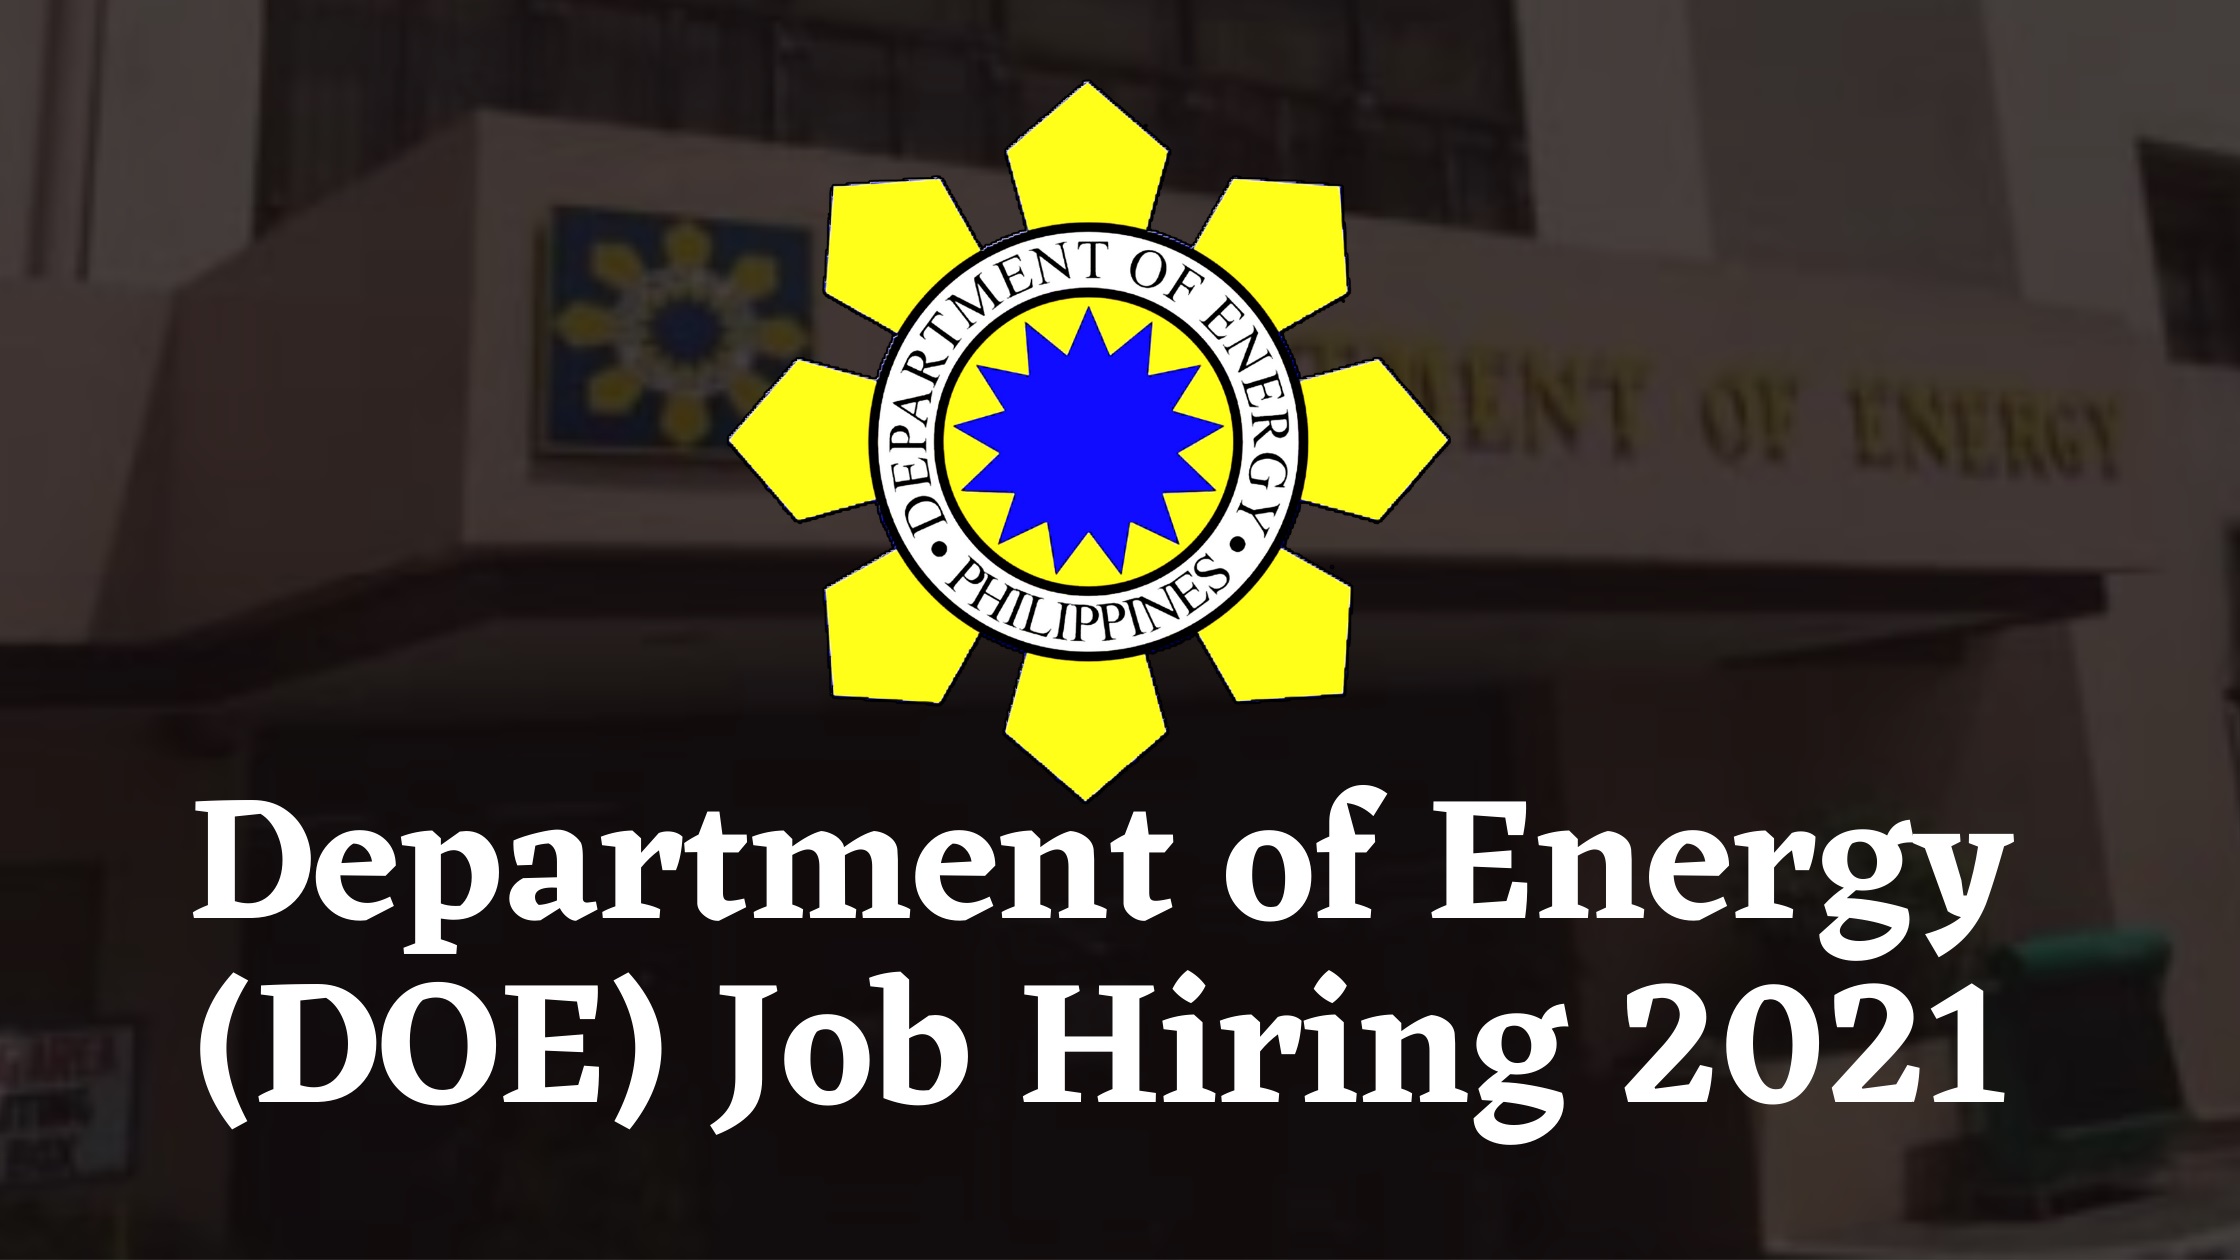 What is the department of energy job